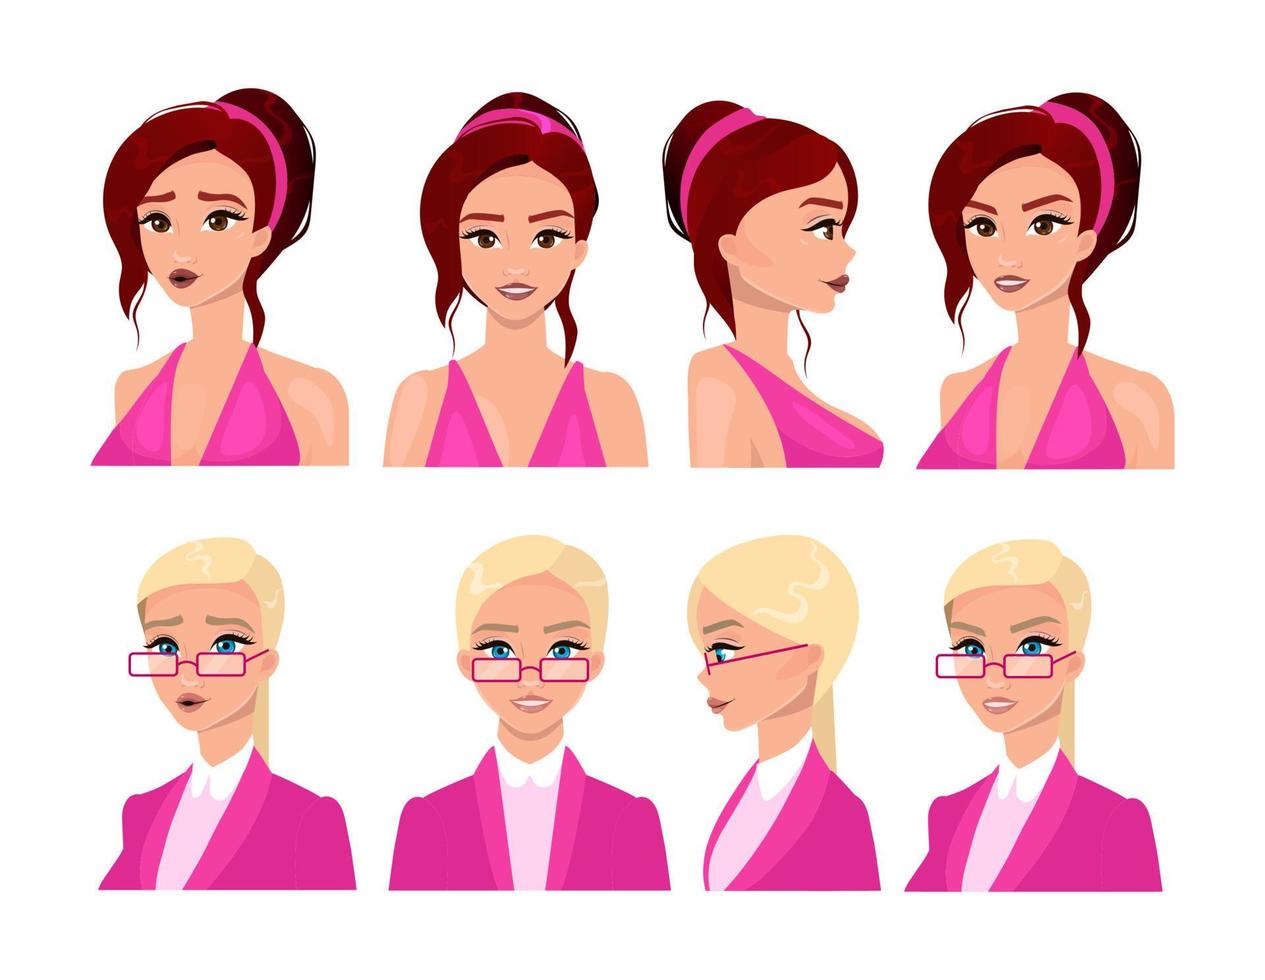 Female faces flat vector illustrations set. Beautiful women avatars with blonde and brunette hair, different facial expressions. Elegant young girls portraits collection. Isolated cartoon characters